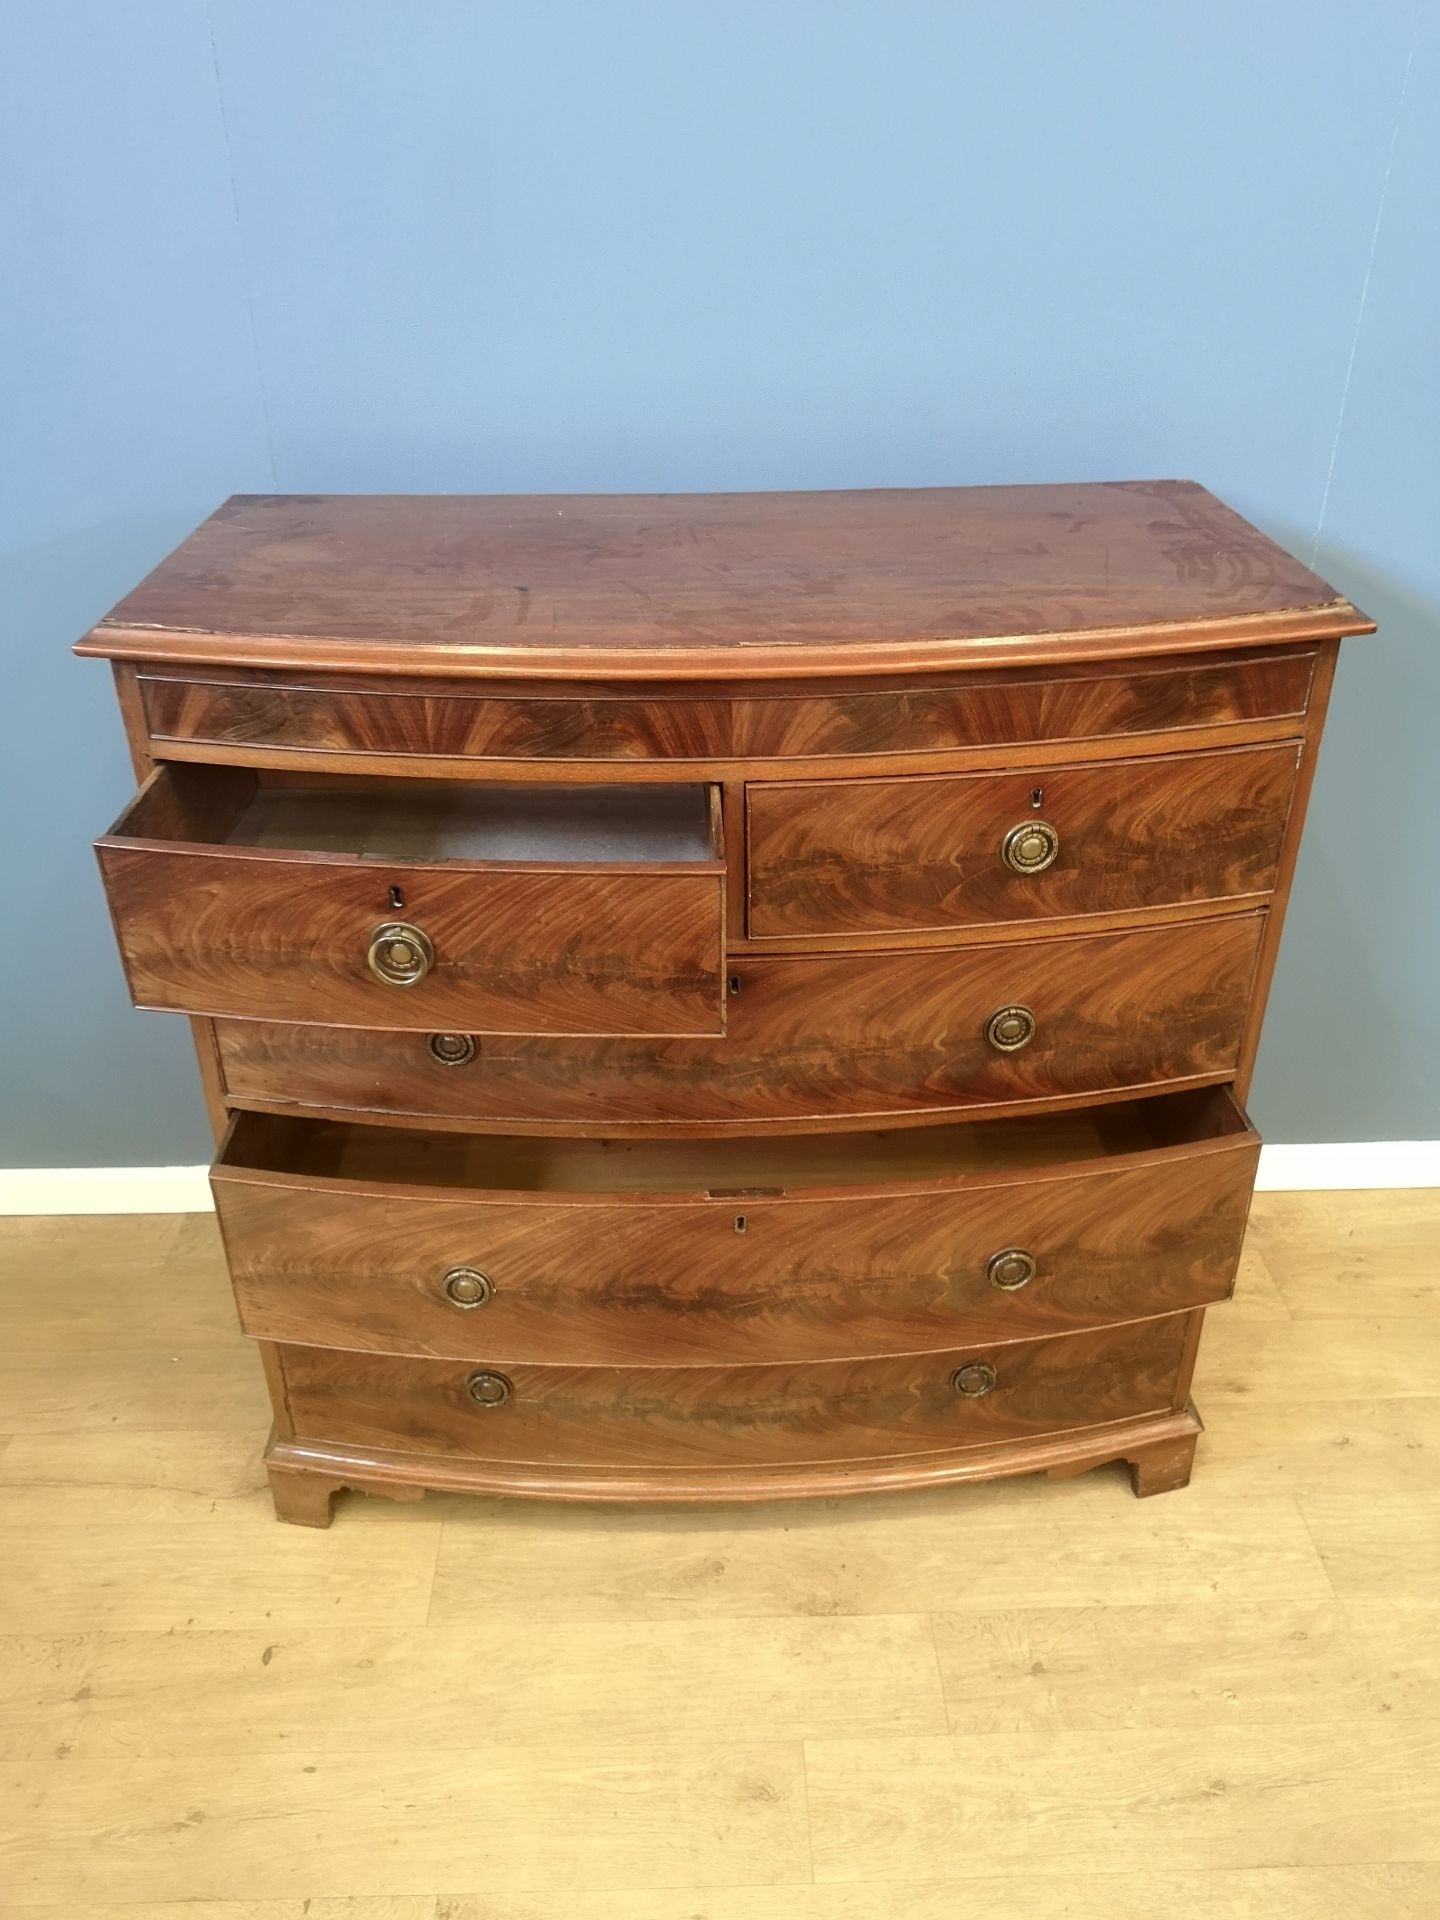 Mahogany bow fronted chest of drawers - Image 4 of 6